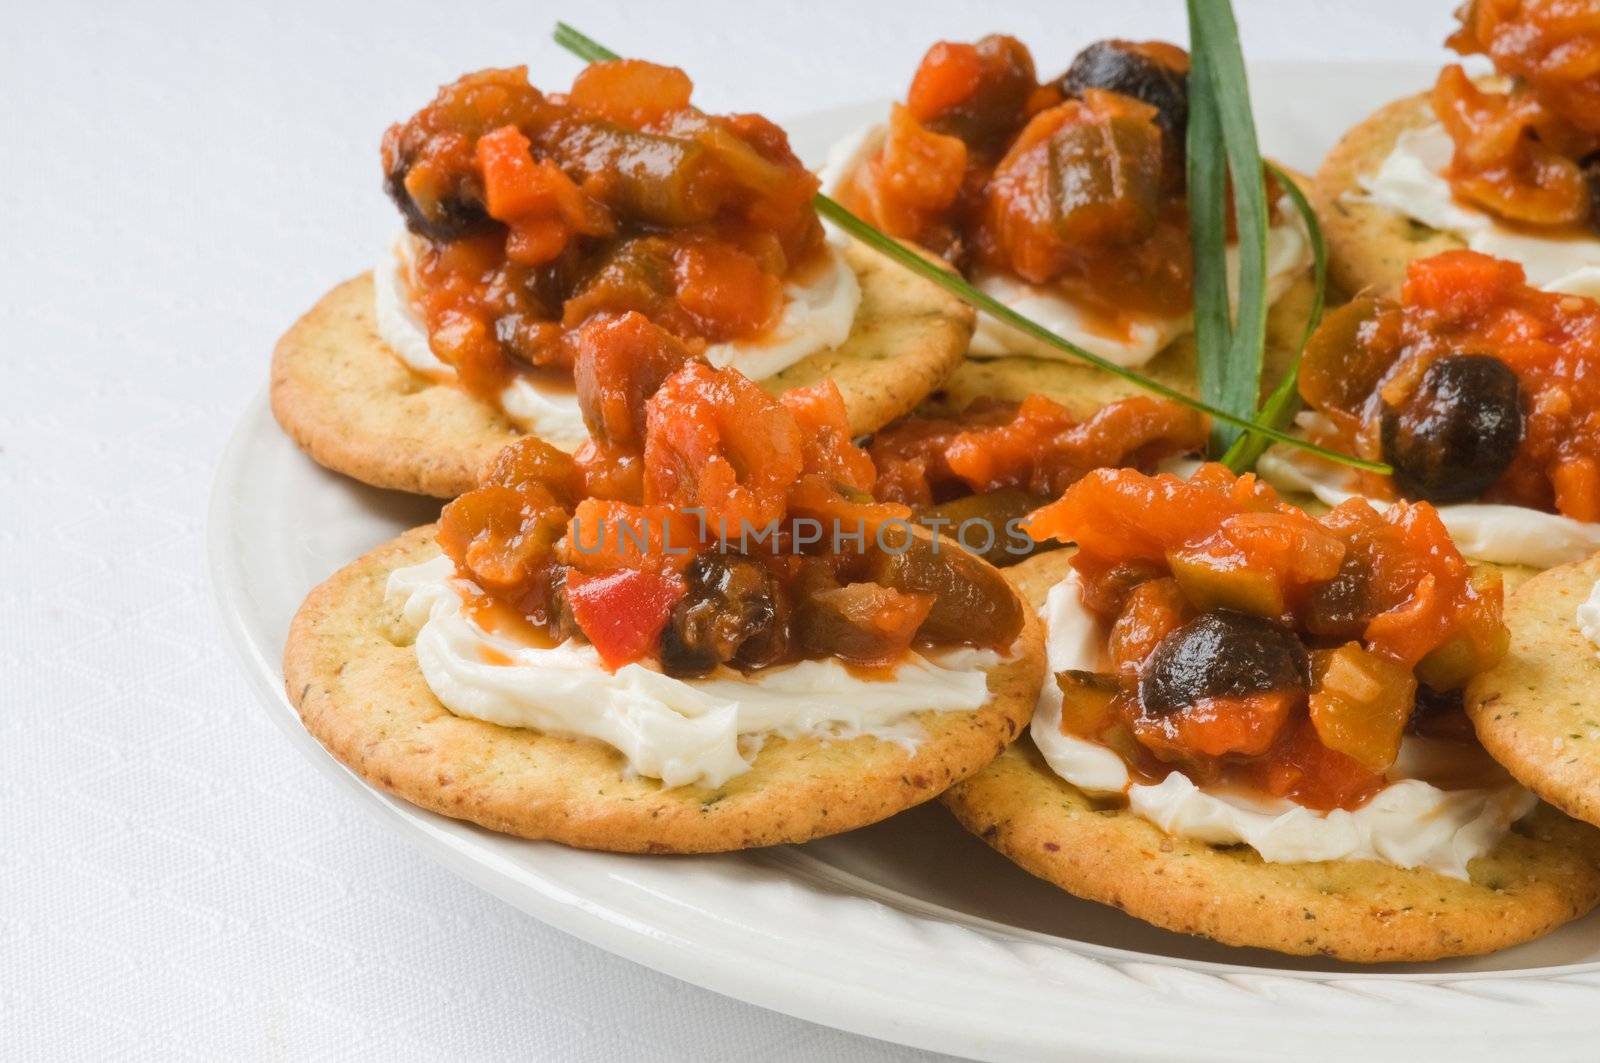 Delicious appetizers made with cream cheese and antipasto.